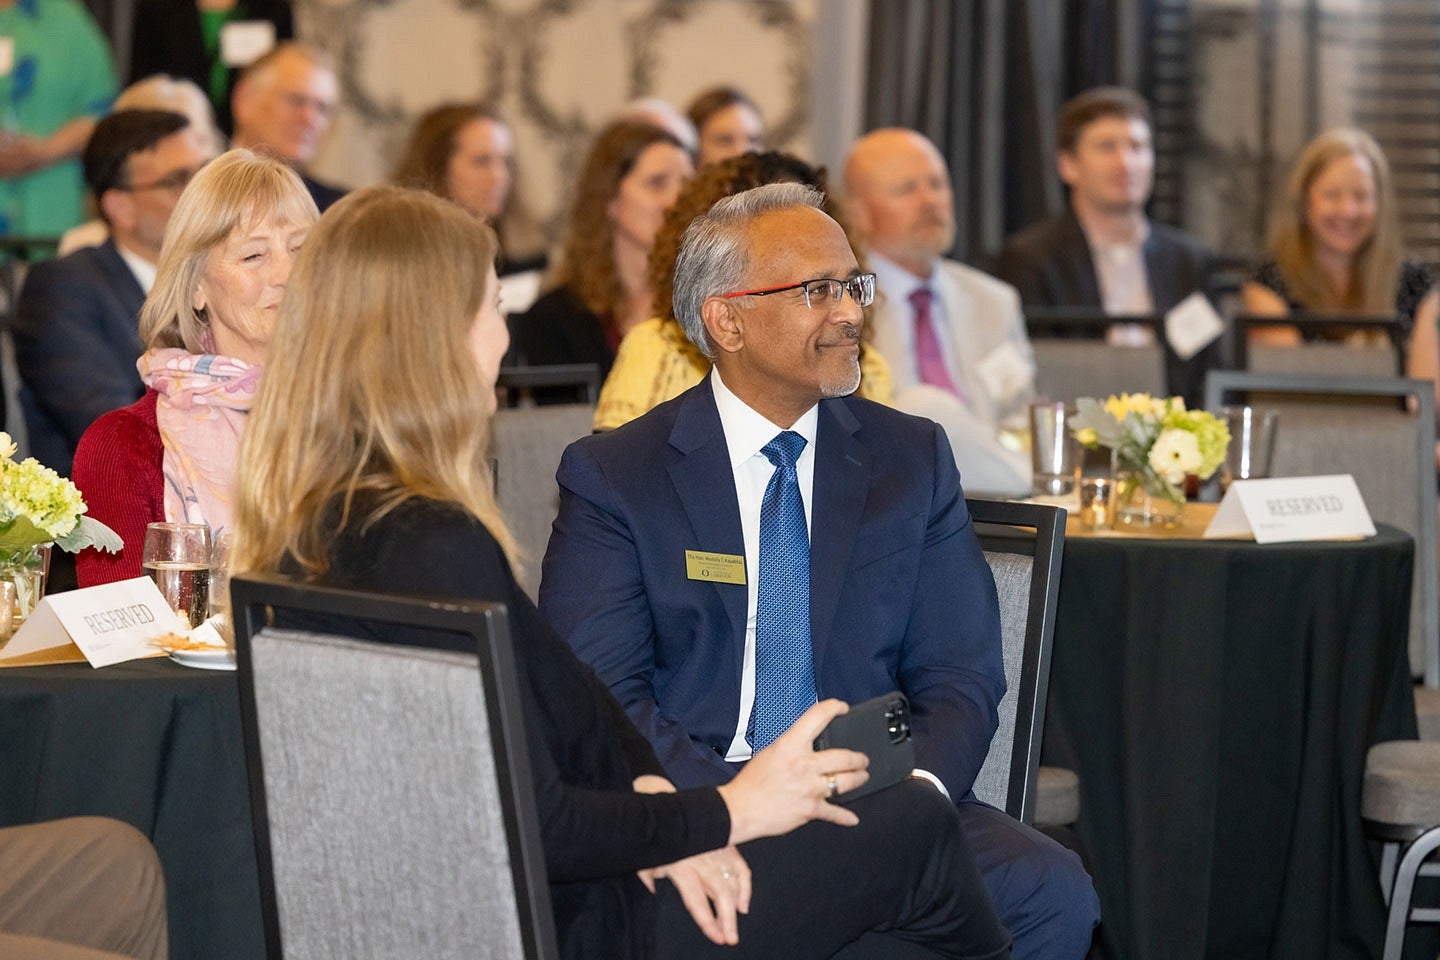 Judge Mustafa T. Kasubhai smiling and watching the Frohnmayer Awards ceremony from the crowd, seated at a table in a crowded ballroom.